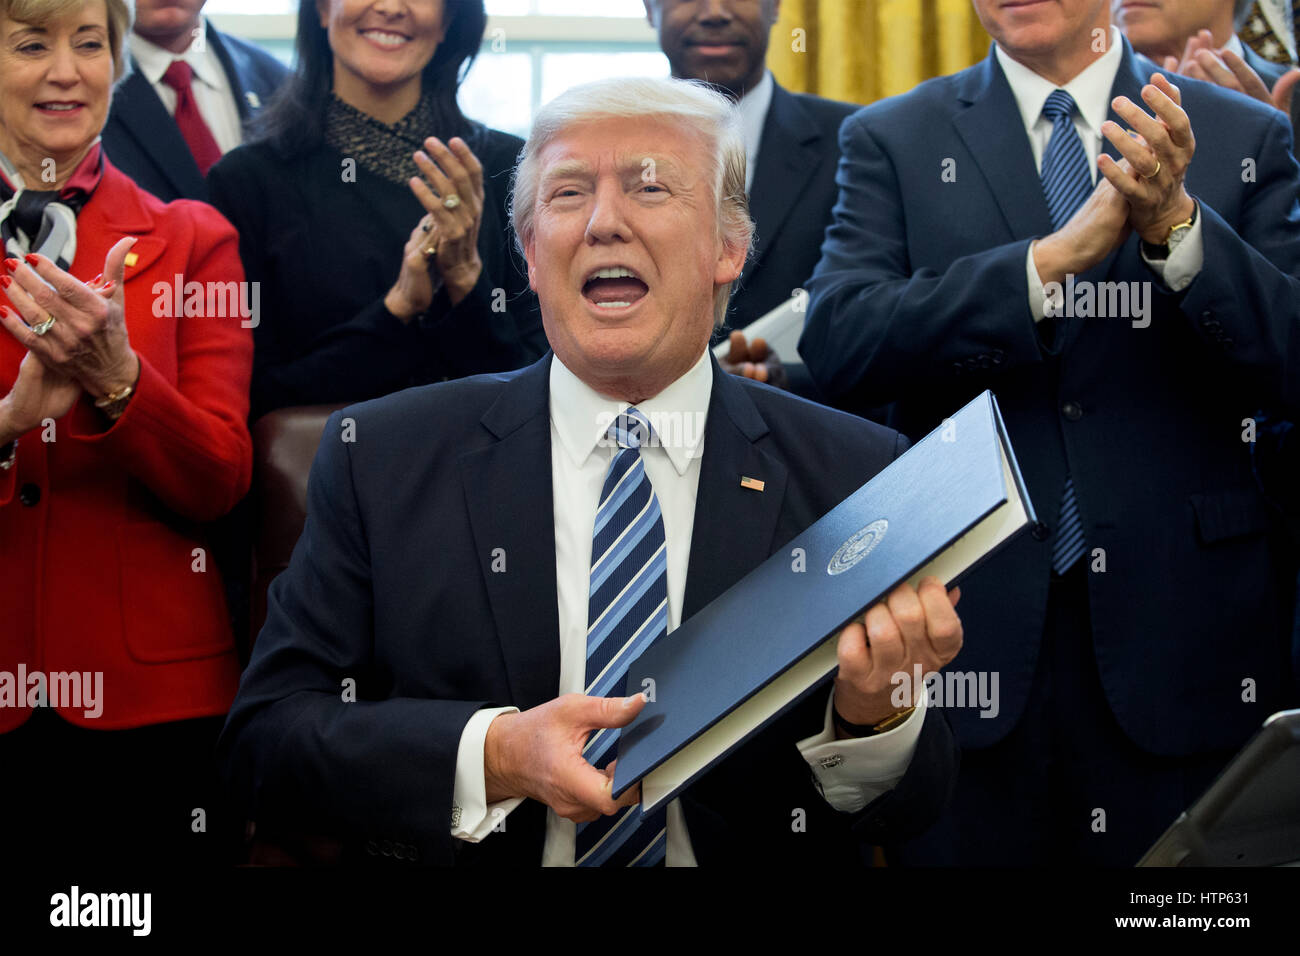 Washington, DC, USA. 13th Mar, 2017. US President Donald J. Trump (C) shows an executive order entitled, 'Comprehensive Plan for Reorganizing the Executive Branch', after signing it beside members of his Cabinet in the Oval Office of the White House in Washington, DC, USA, 13 March 2017. Credit: Michael Reynolds/Pool via CNP - NO WIRE SERVICE - Photo: Michael Reynolds/Consolidated News Photos/Michael Reynolds - Pool via CNP/dpa/Alamy Live News Stock Photo